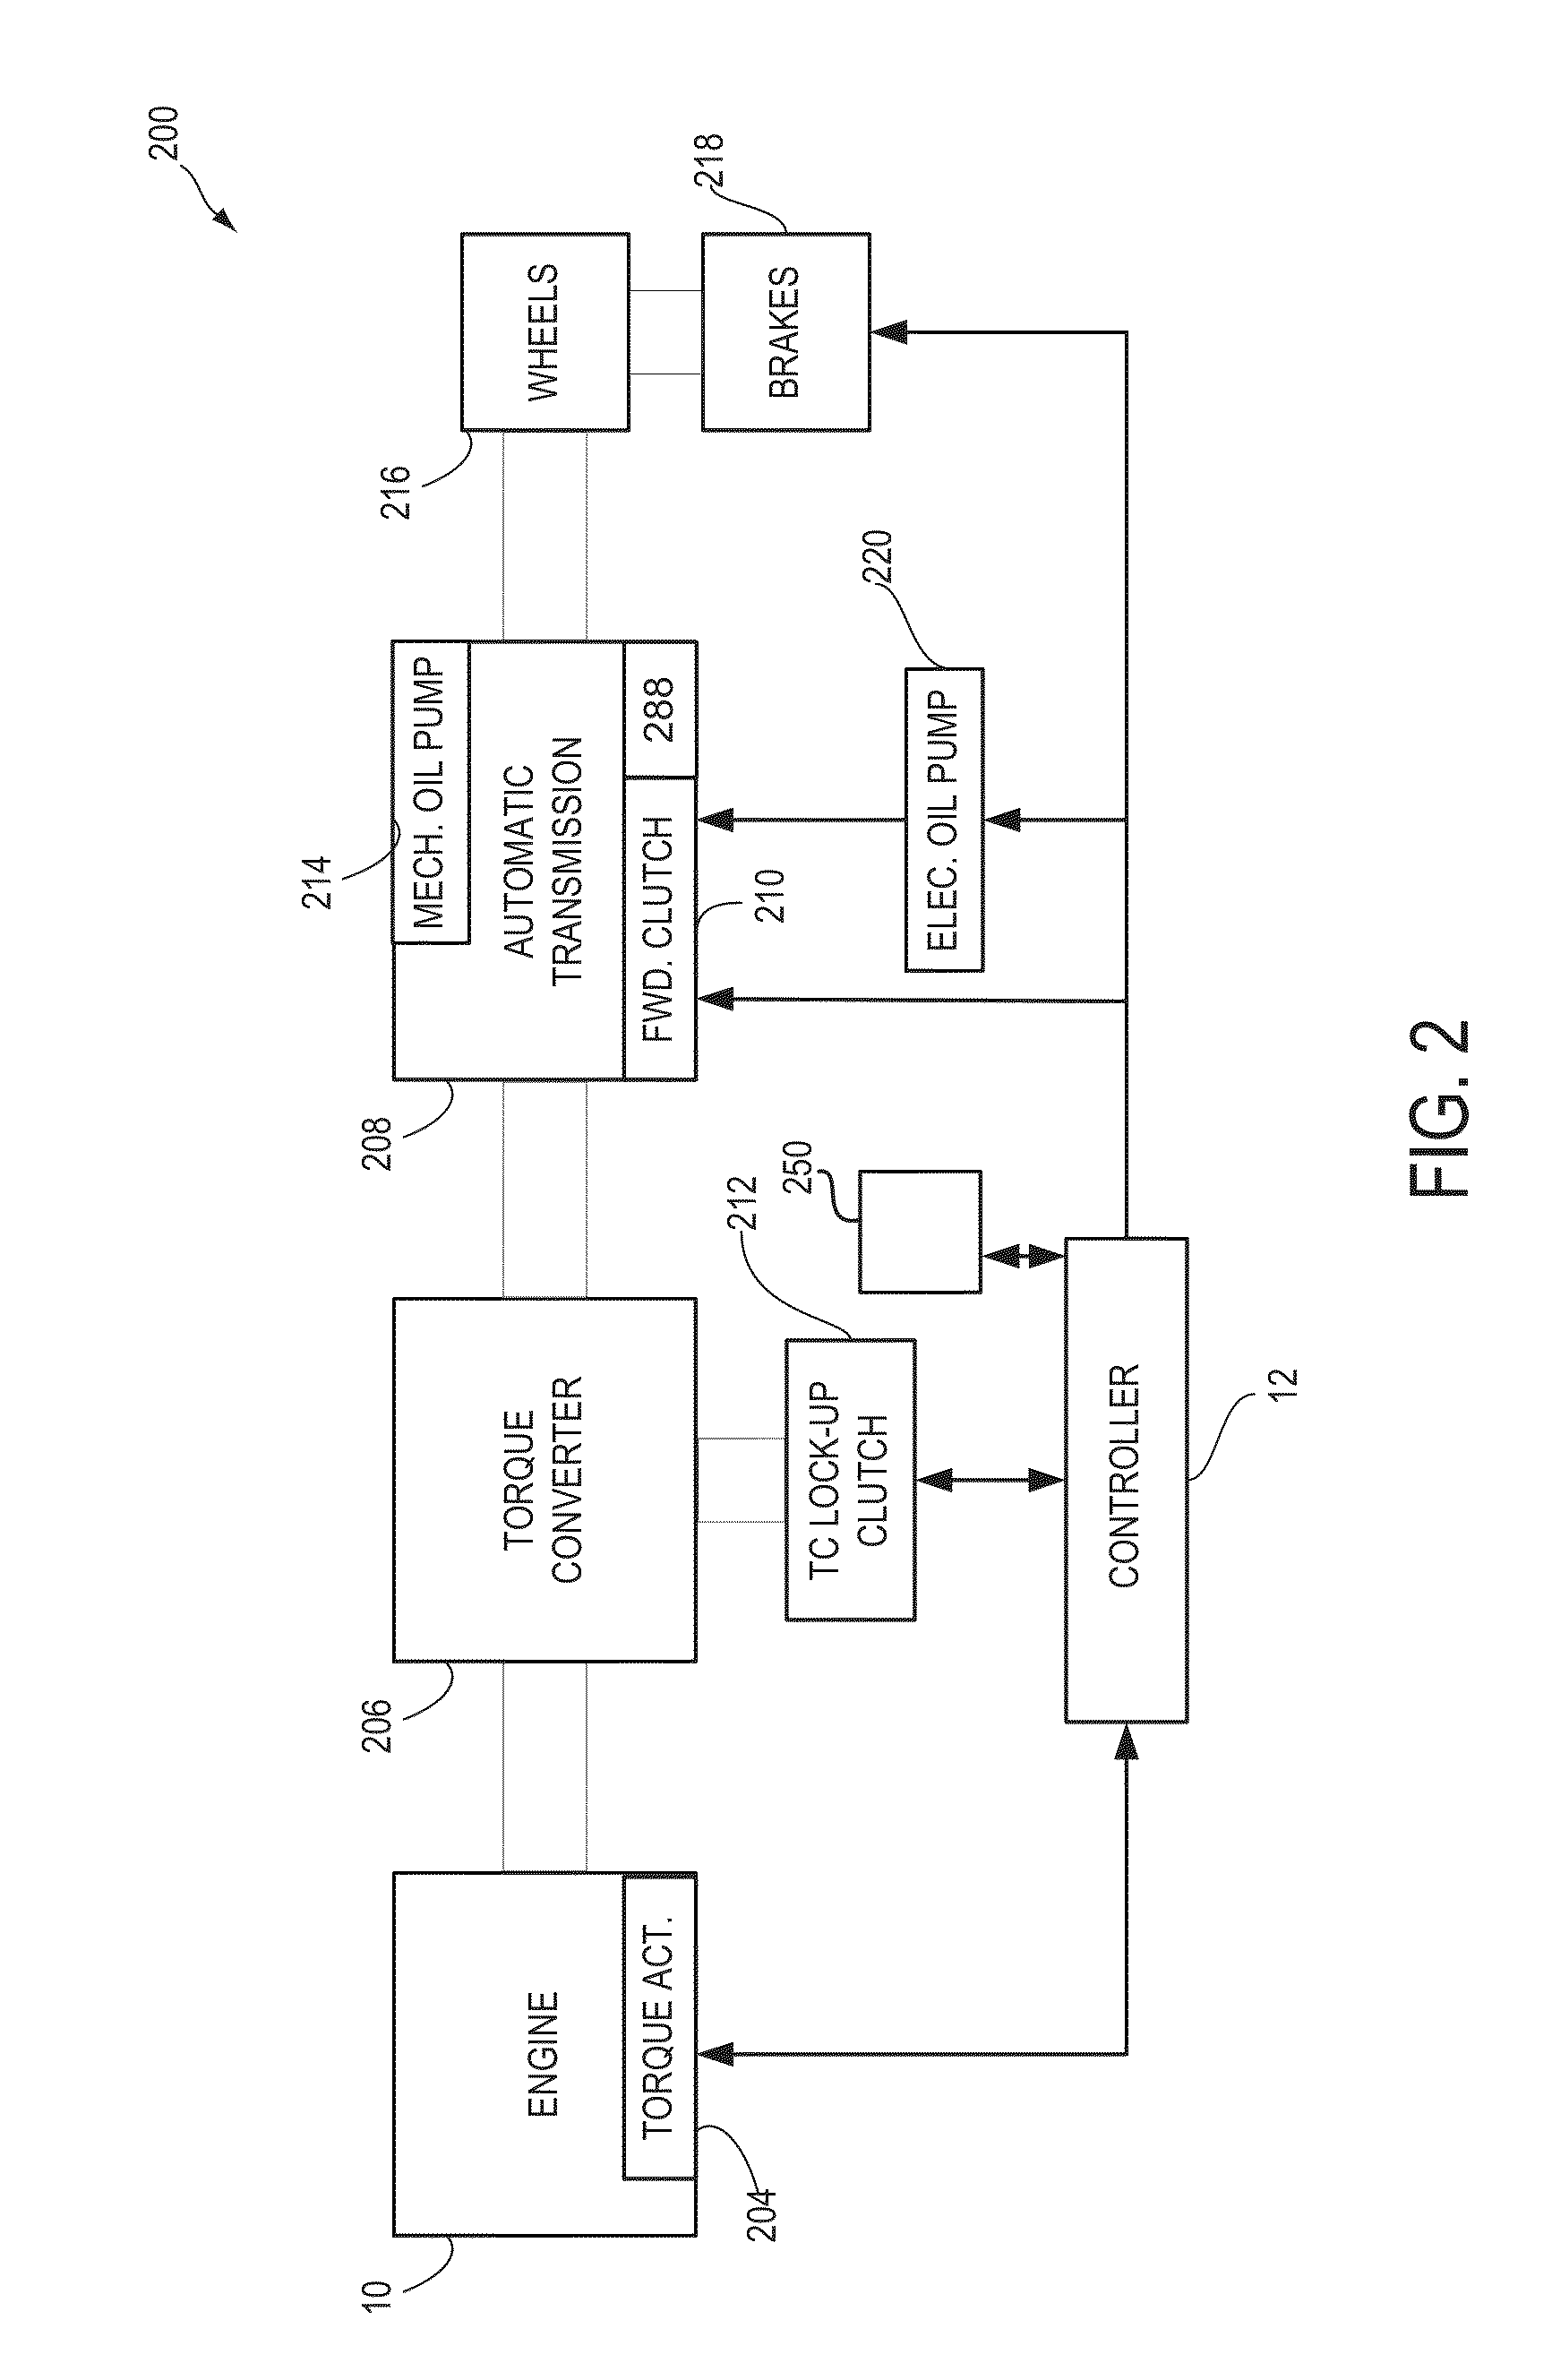 Method and system for improving automatic engine stopping